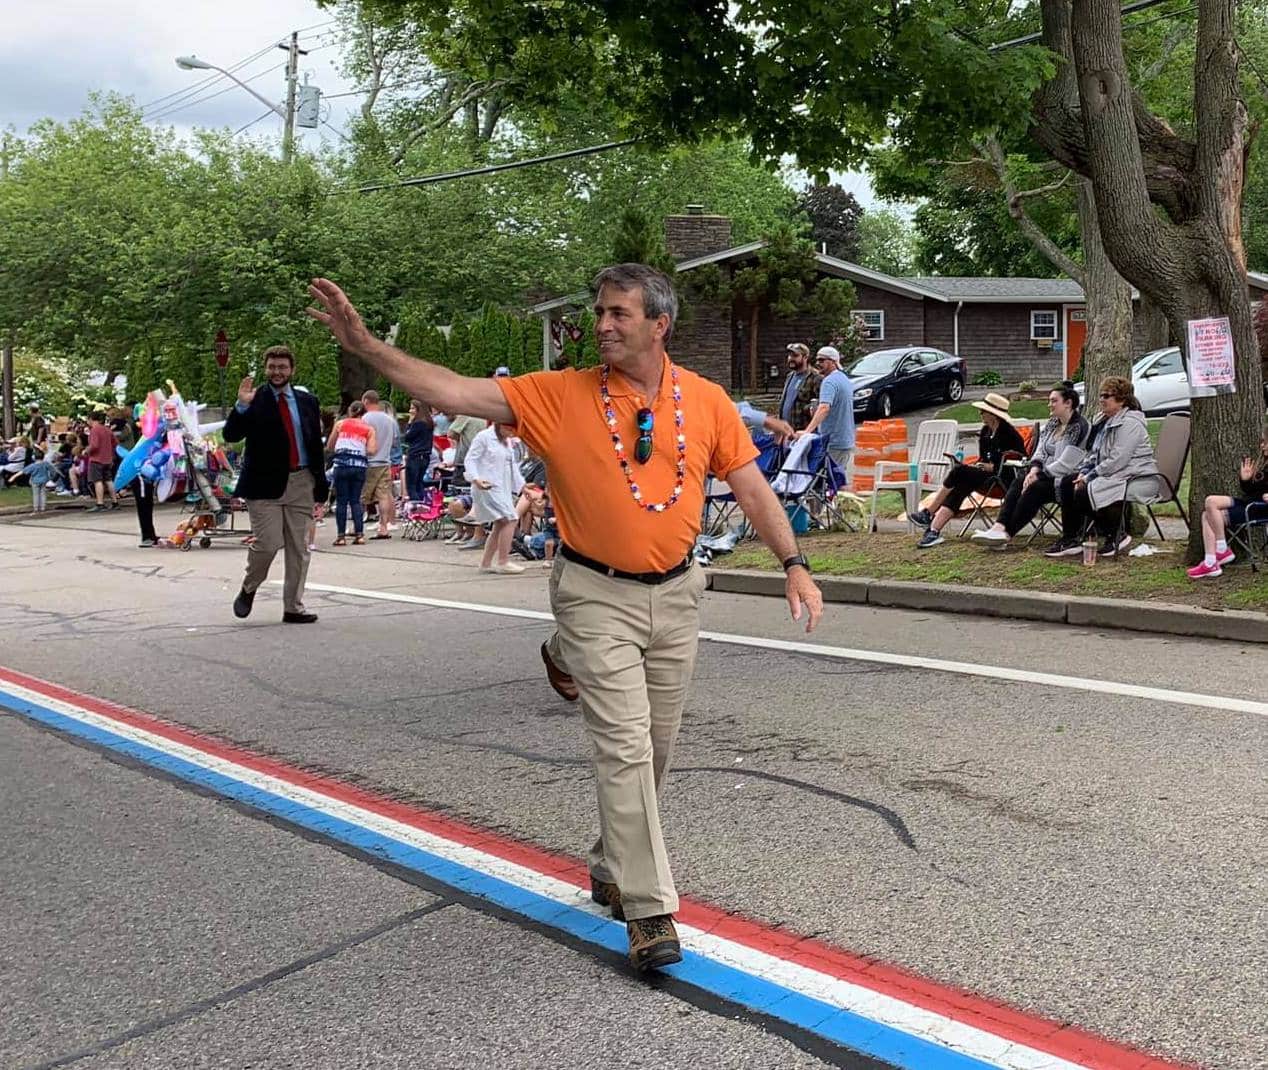 [CREDIT: Gaspee Day Committee] Mayor Frank Picozzi during the 2021 Gaspee Day Parade.